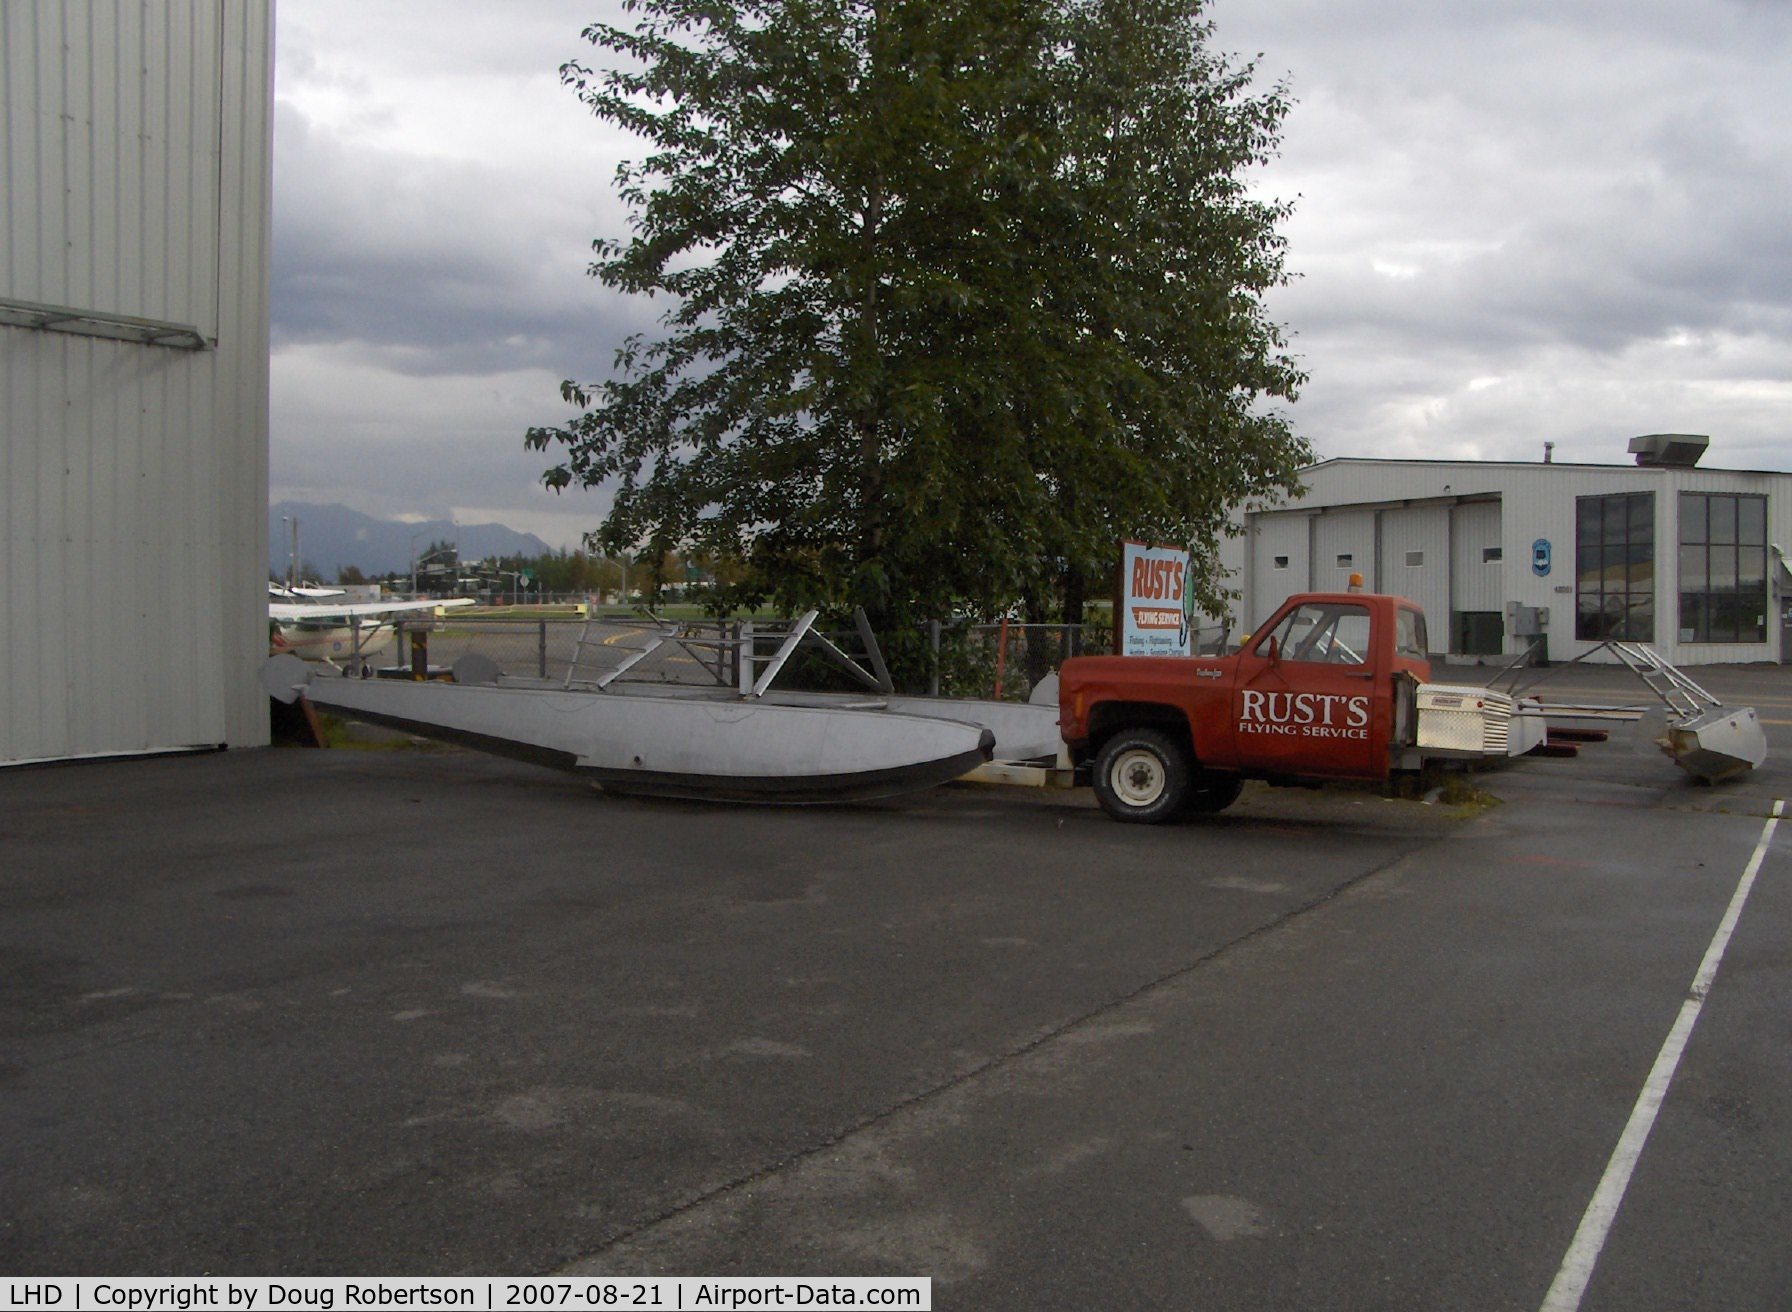 Lake Hood Seaplane Base (LHD) - Highly modified truck with capability to position straight-float plane aircraft out of water.